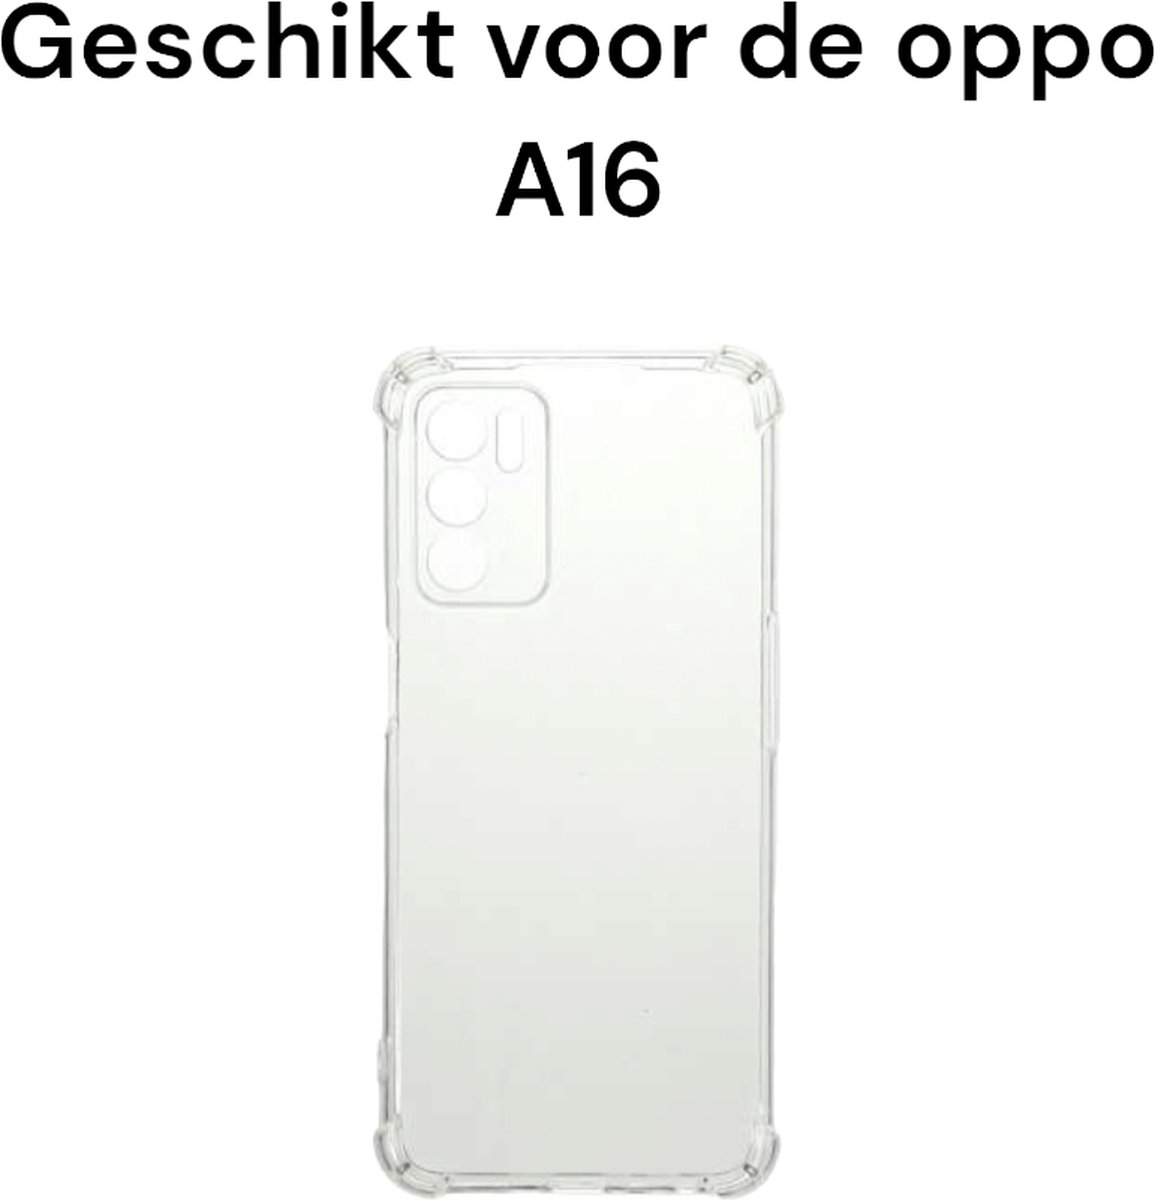 oppo a16 hoesje siliconen transparant antishock achterkant - oppo a16 hoesje siliconen schock proof doorzichtig back cover